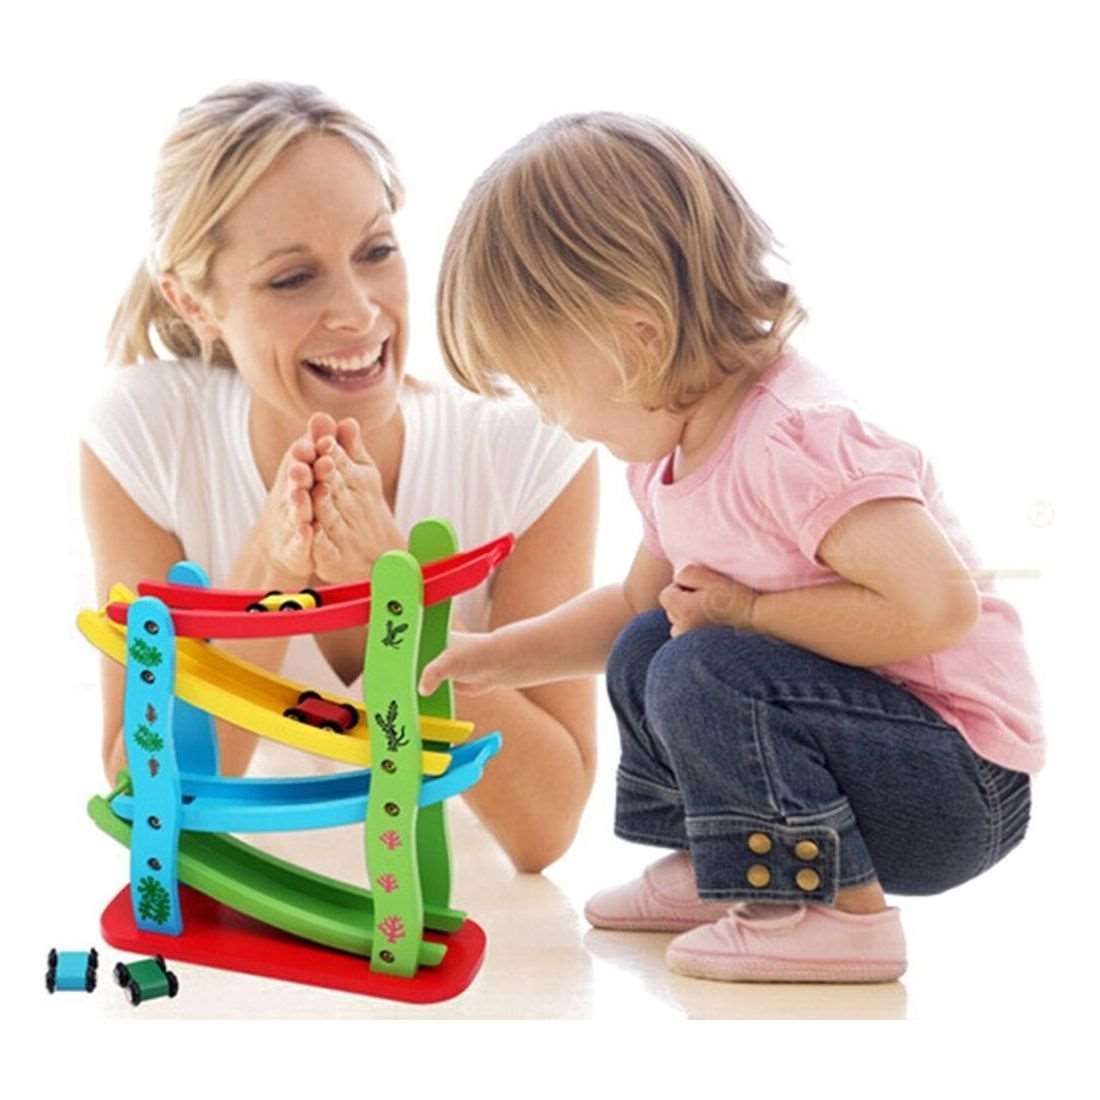 1pc Wooden Ramp Racer Toddler Toys Race Track Car Games for Kids Boys Girls Gifts with 4 Small Racers